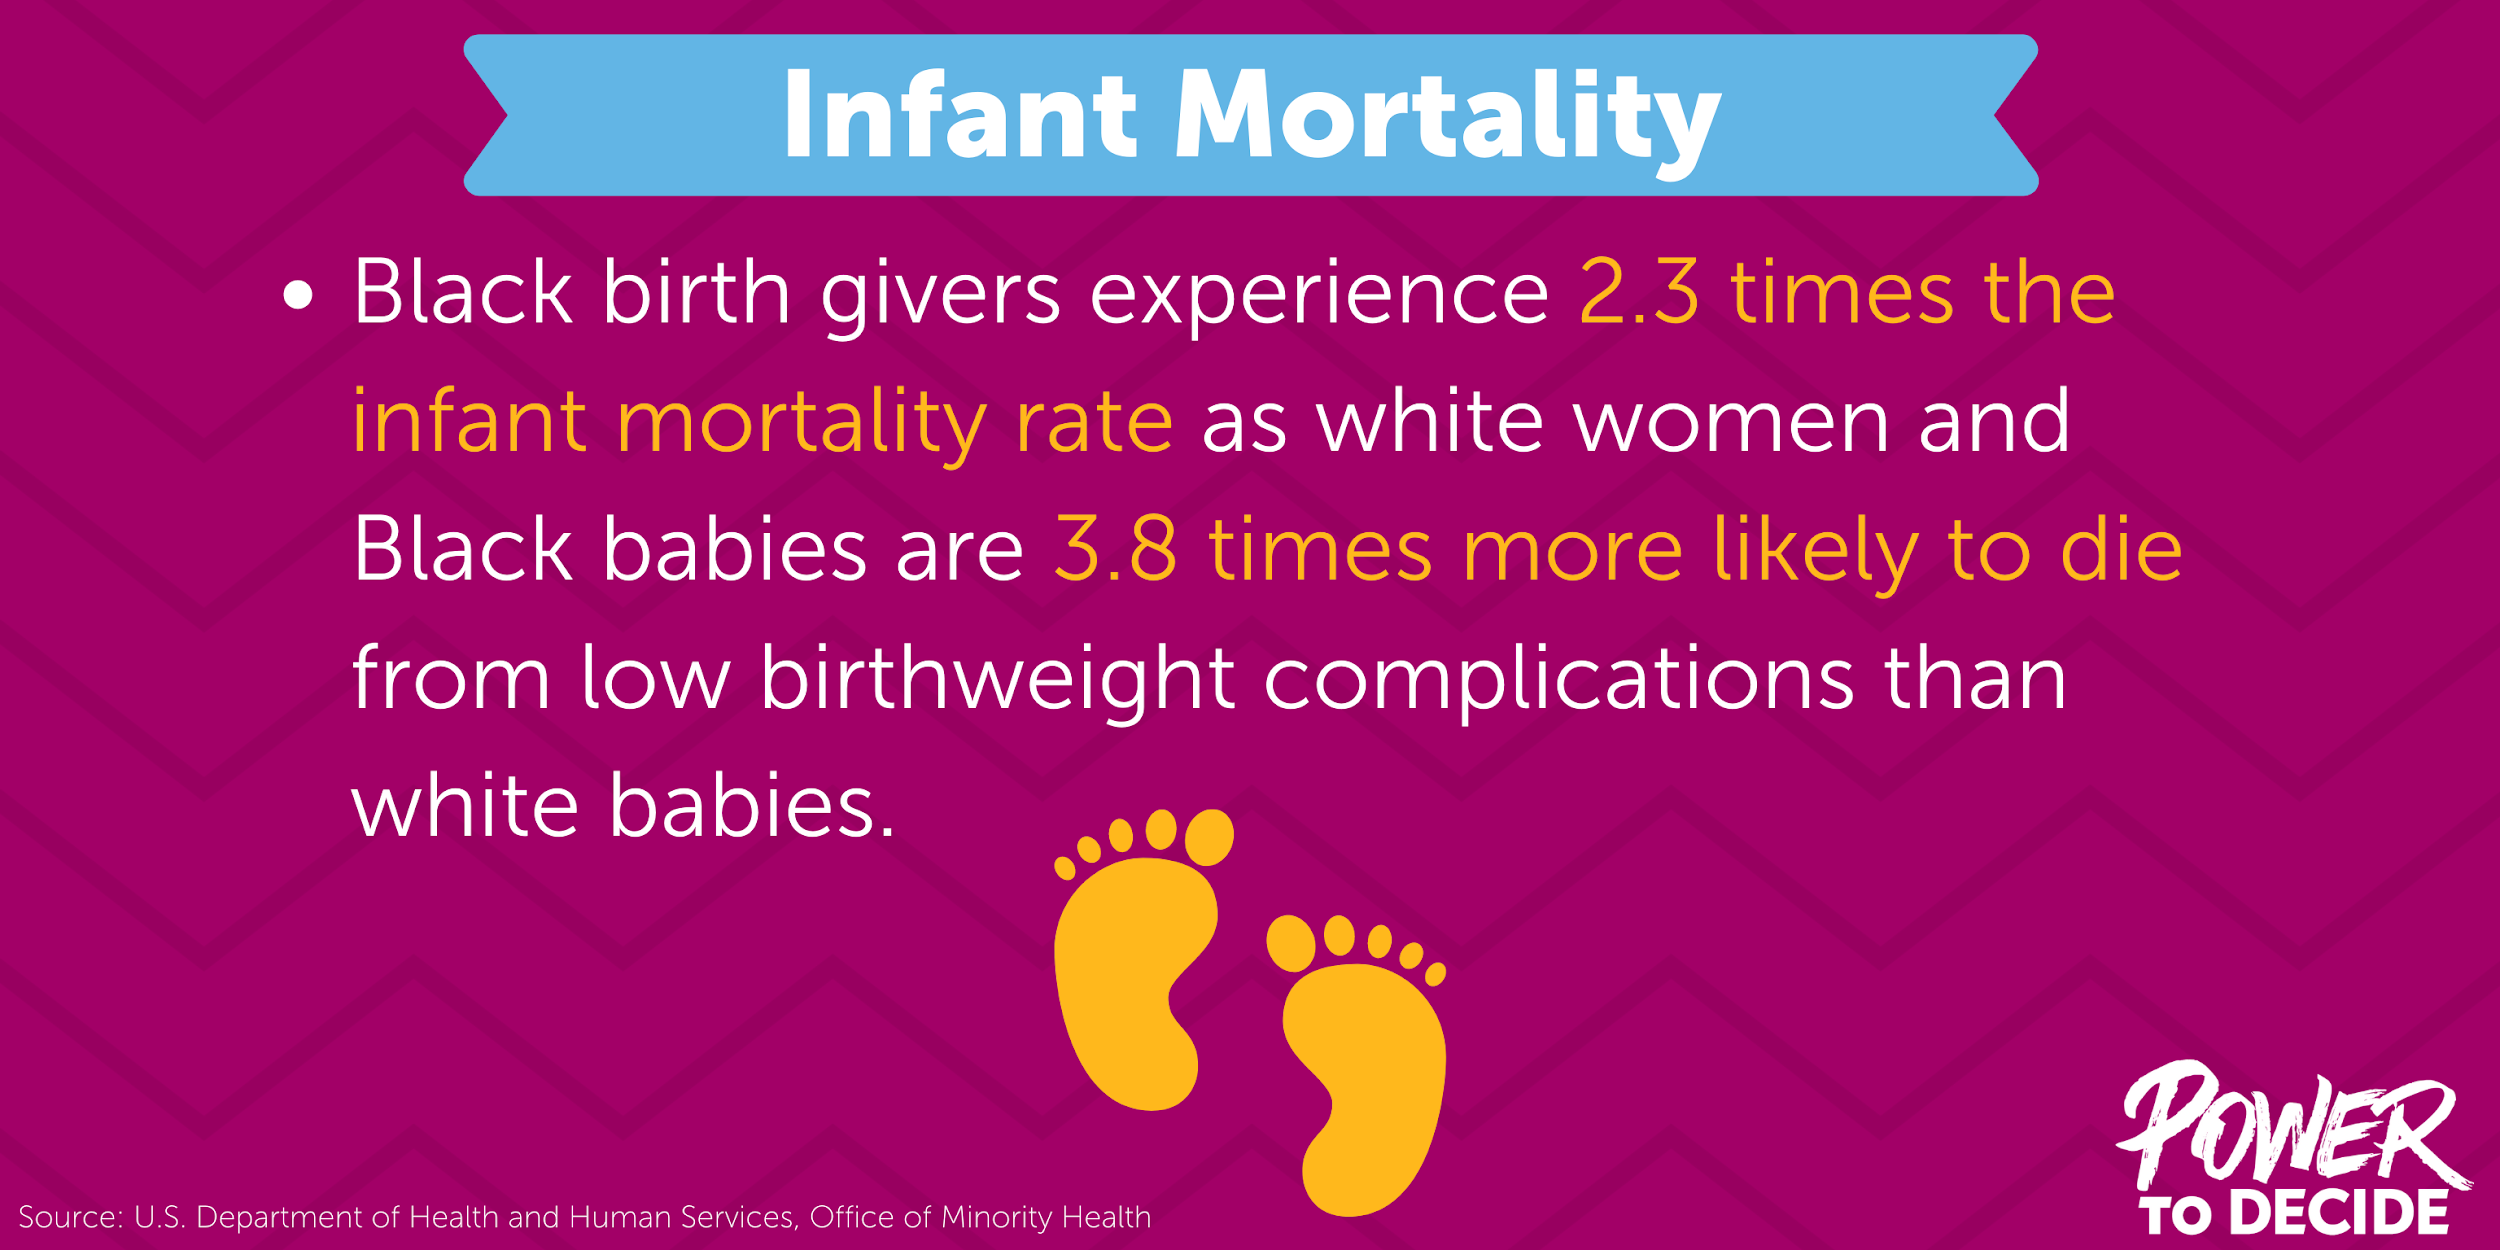 An illustration of baby feet and the words, "Black birth givers experience 2.3 times the infant mortality rate as white women and Black babies are 3.8 times more likely to die from low birthweight complications than white babies."